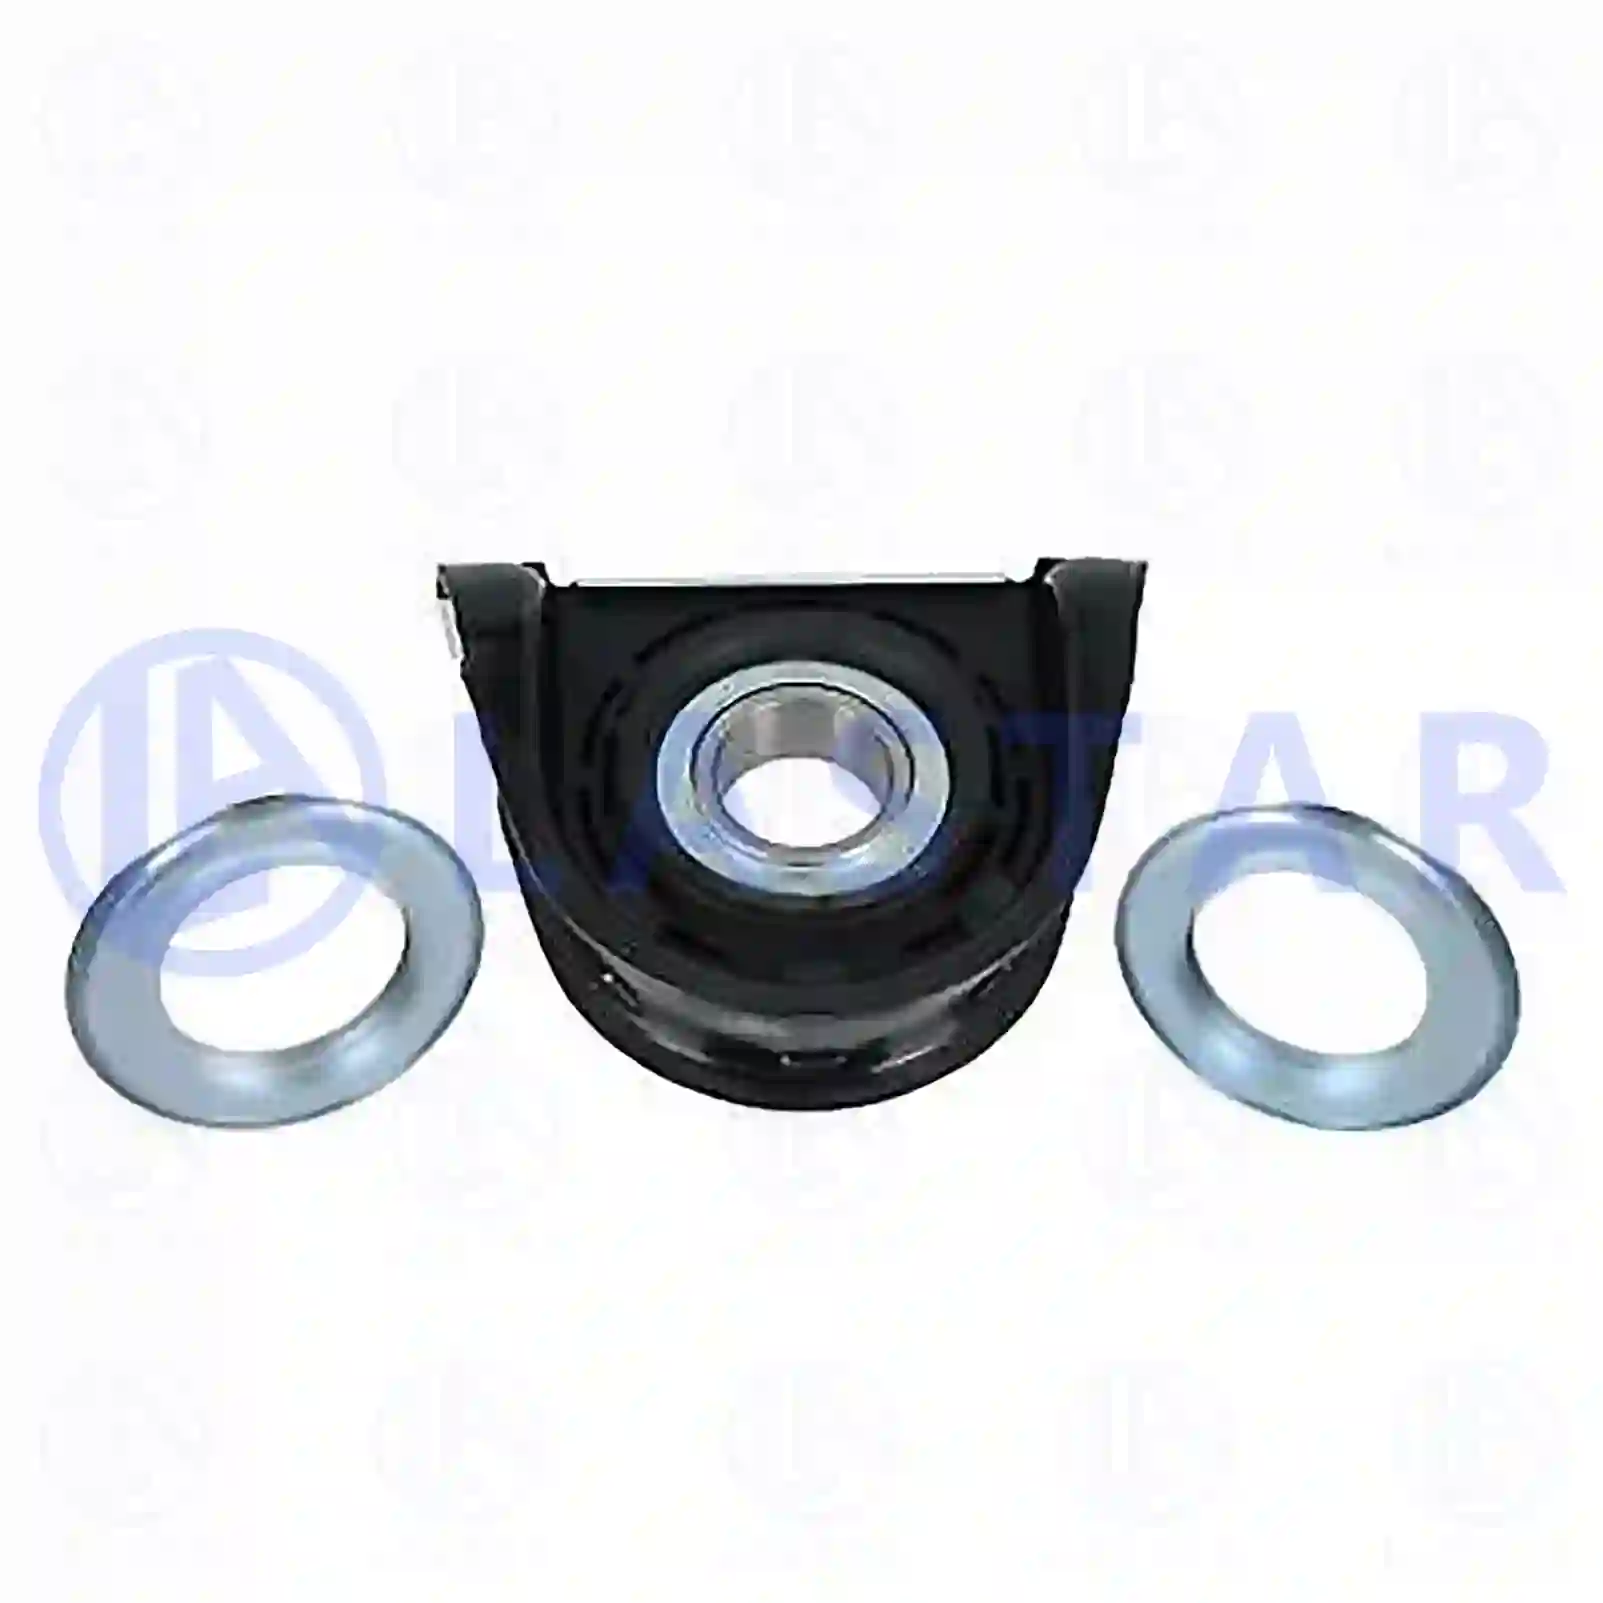 Support Bearing Center bearing, la no: 77734327 ,  oem no:5001866236 Lastar Spare Part | Truck Spare Parts, Auotomotive Spare Parts